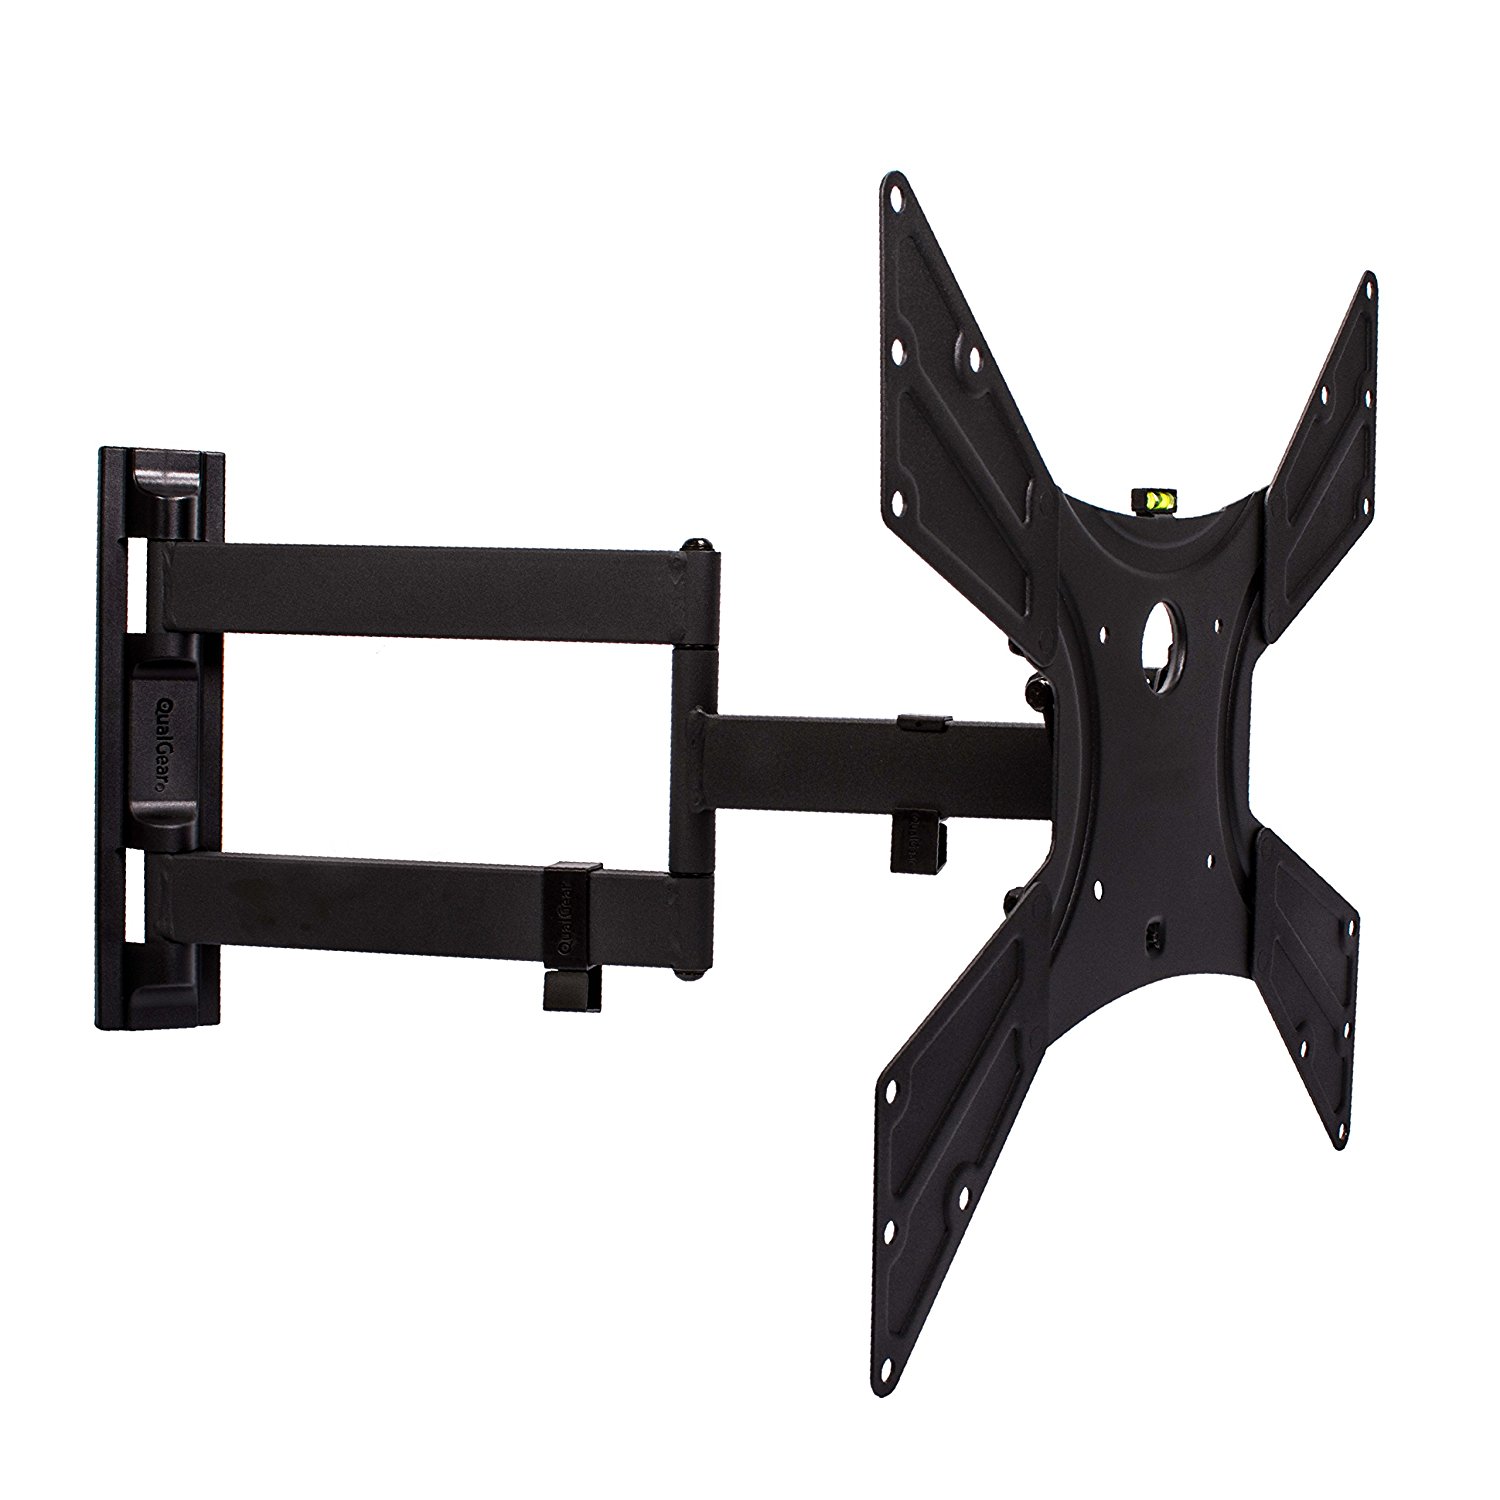 QualGear QG-TM-021-BLK Universal Ultra Slim Low Profile Articulating TV Wall Mount Kit for most 23-inch to 47-inch and some 55-inch LED TVs, w/ HDMI v2.0 Cable 6 ft